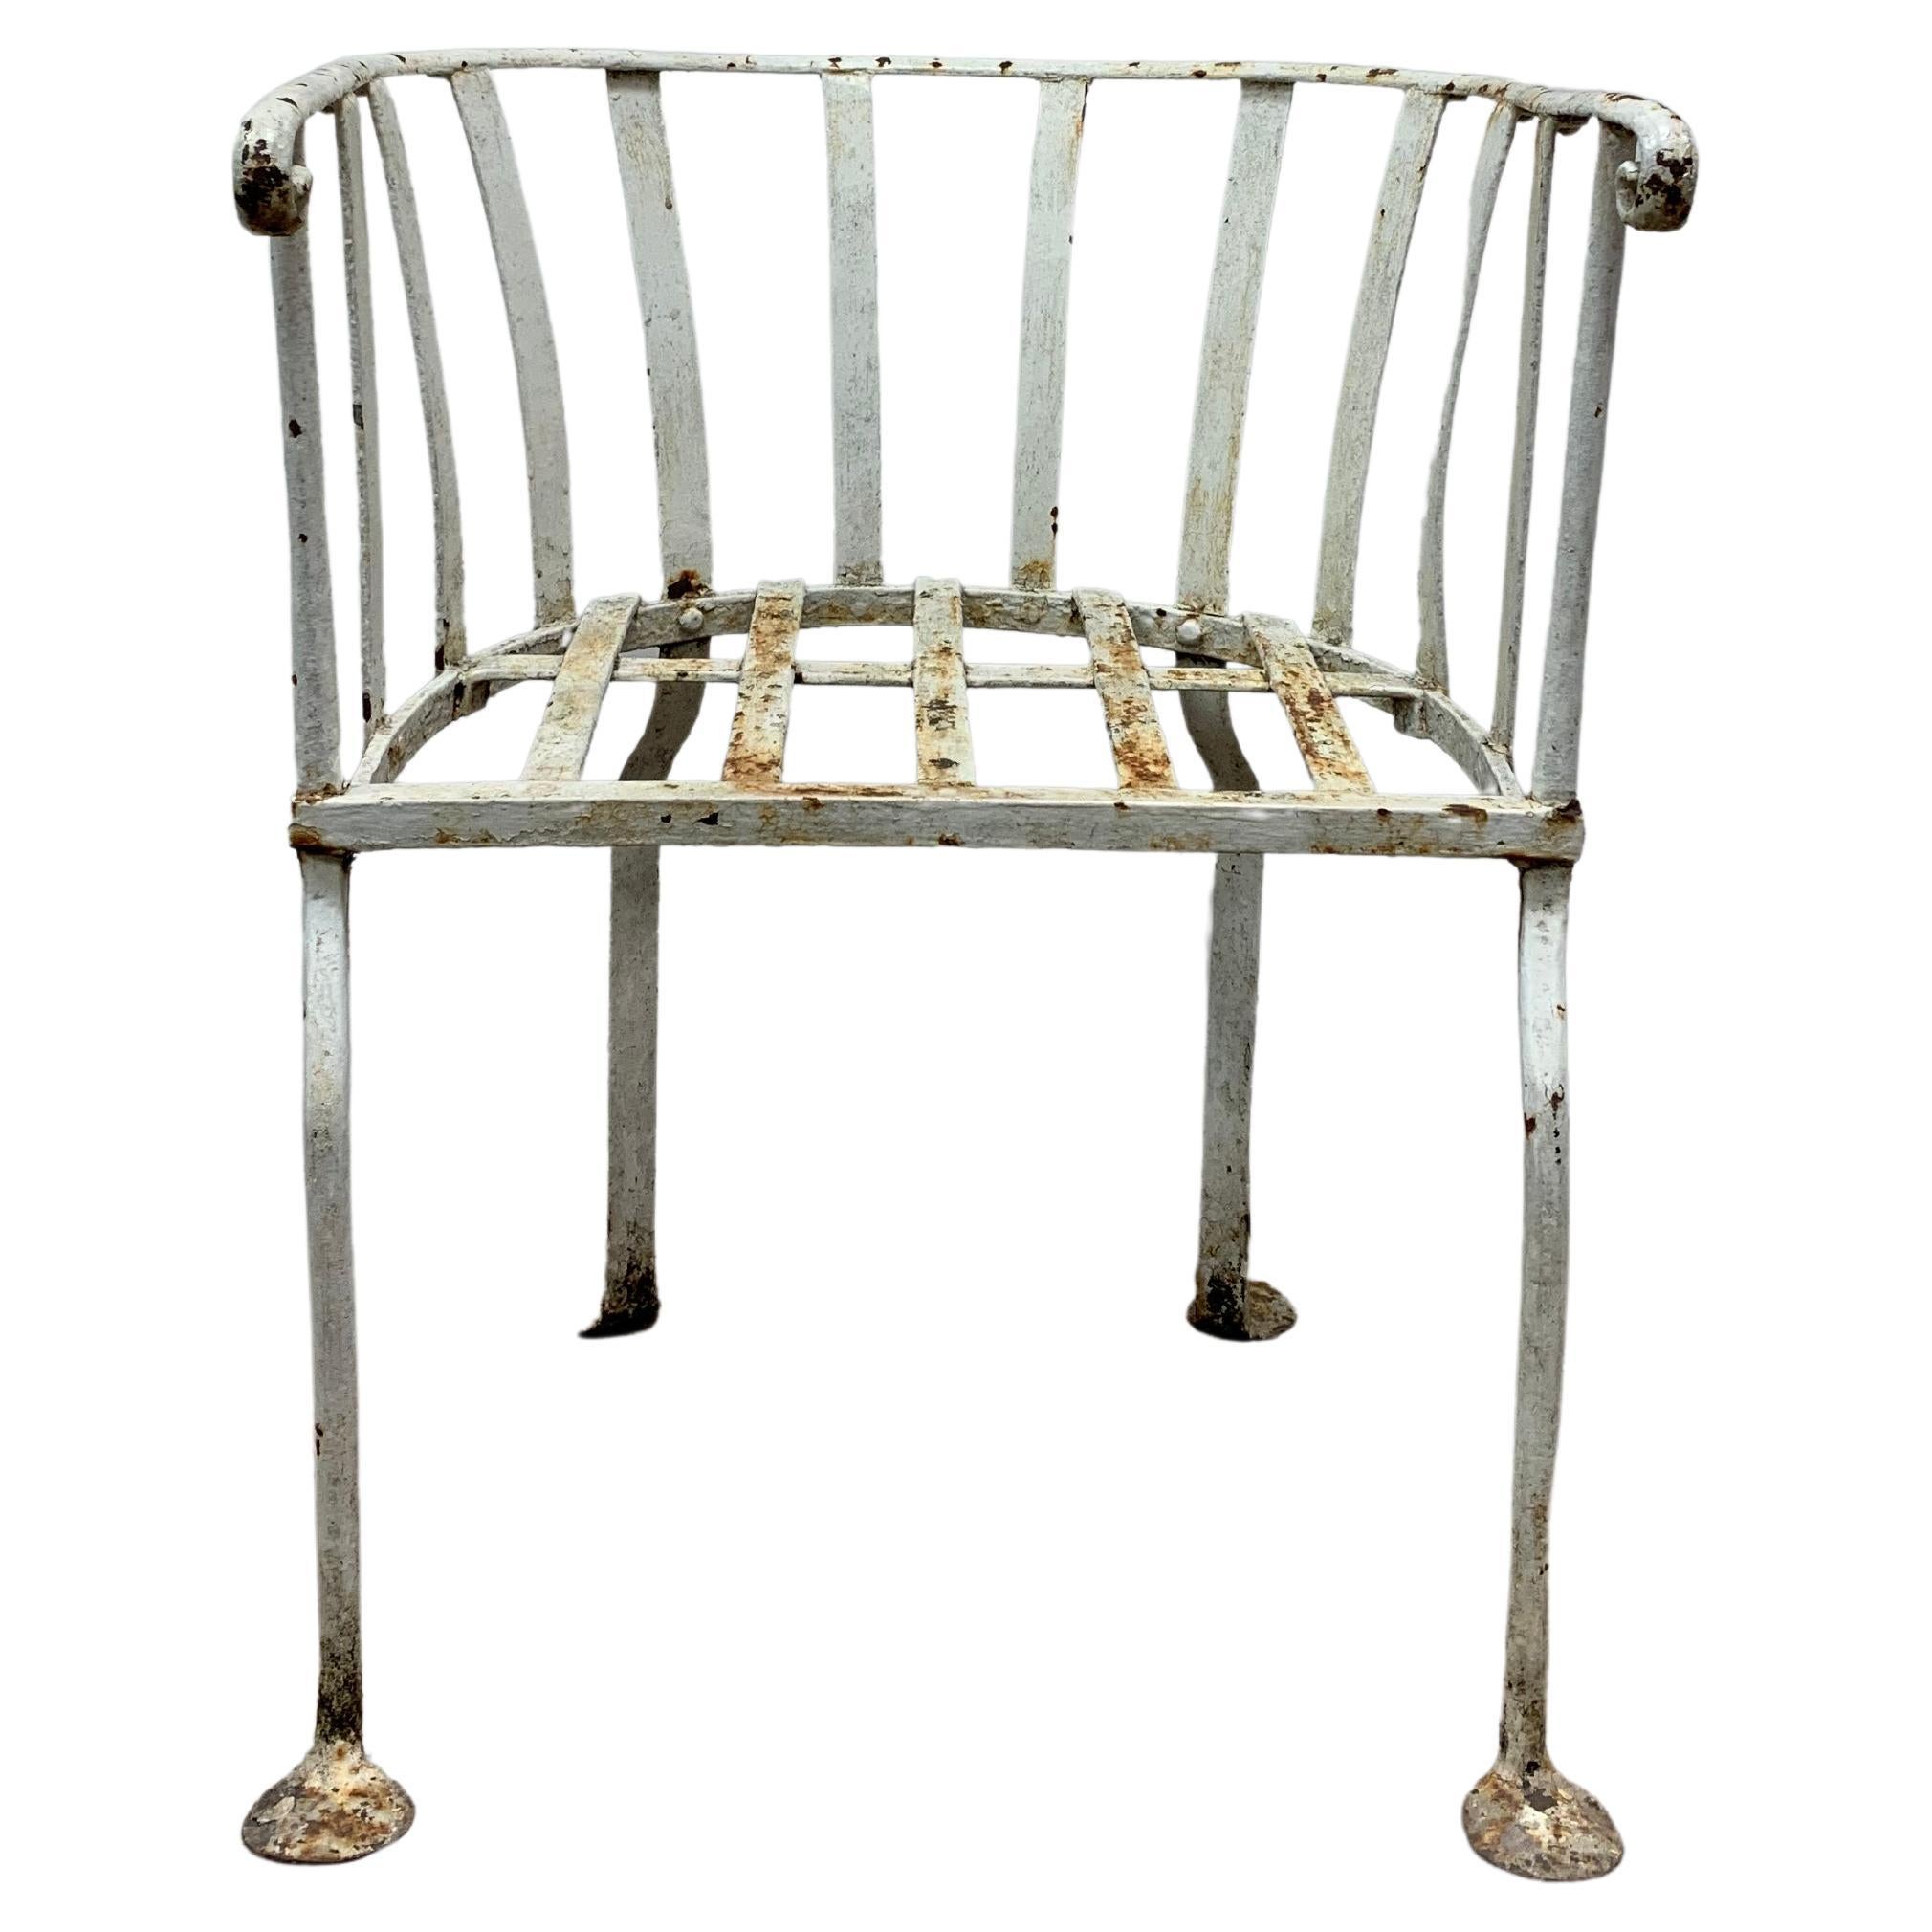 19th Century English Wrought Iron Garden Chair with a Curved Rounded Back